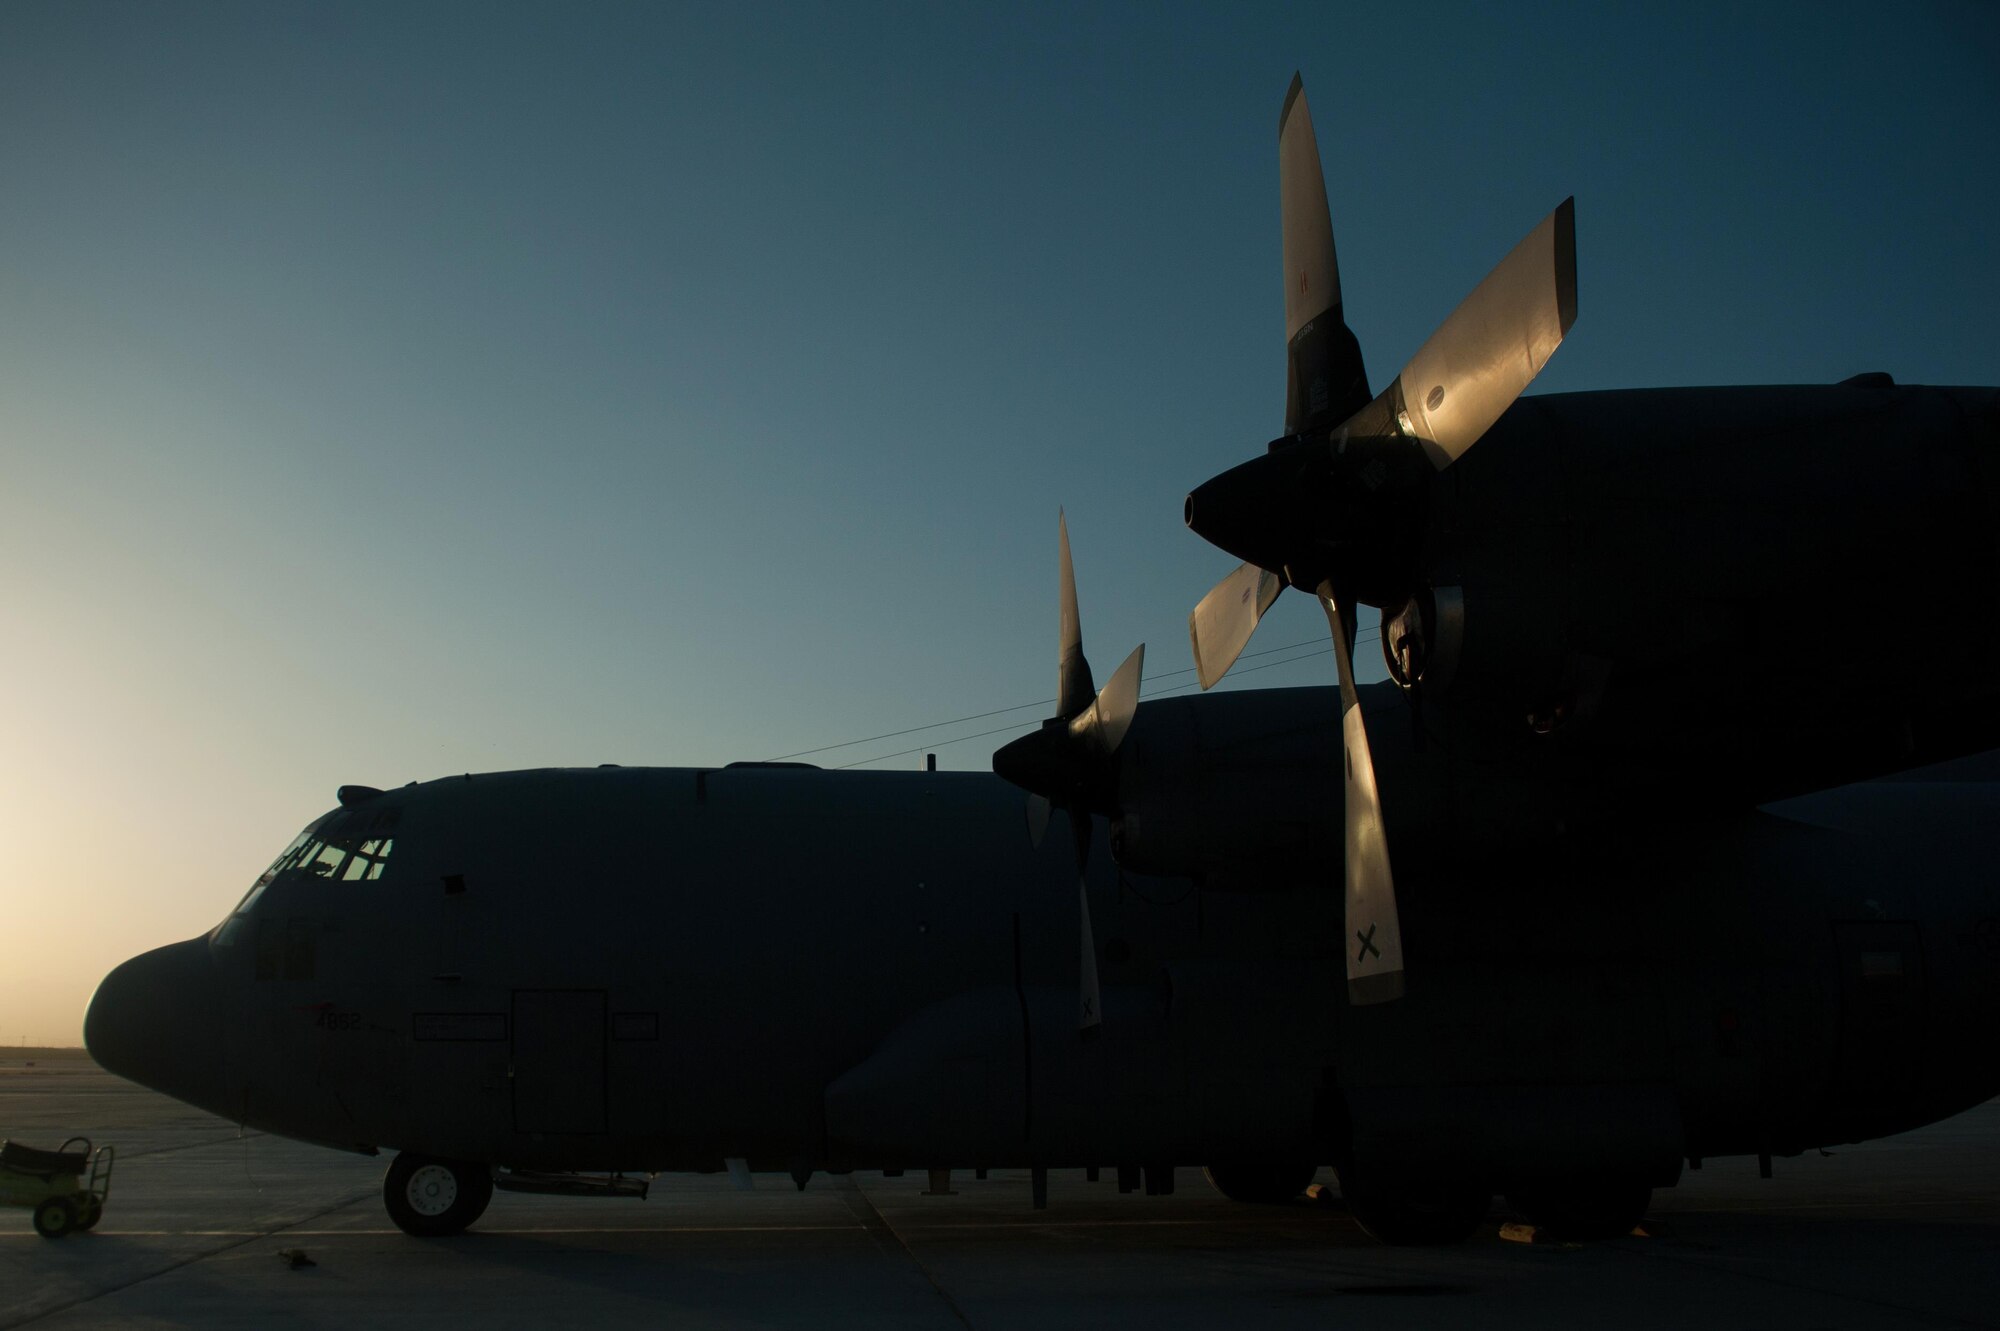 A U.S. EC-130H Compass Call aircraft assigned to the 41st Expeditionary Electronic Combat Squadron sits on the flight line at Bagram Airfield, Afghanistan, Sept. 6, 2015. The Compass Call is an airborne tactical weapon system using a heavily modified version of the C-130 Hercules airframe. (U.S. Air Force photo by Tech. Sgt. Joseph Swafford/Released)